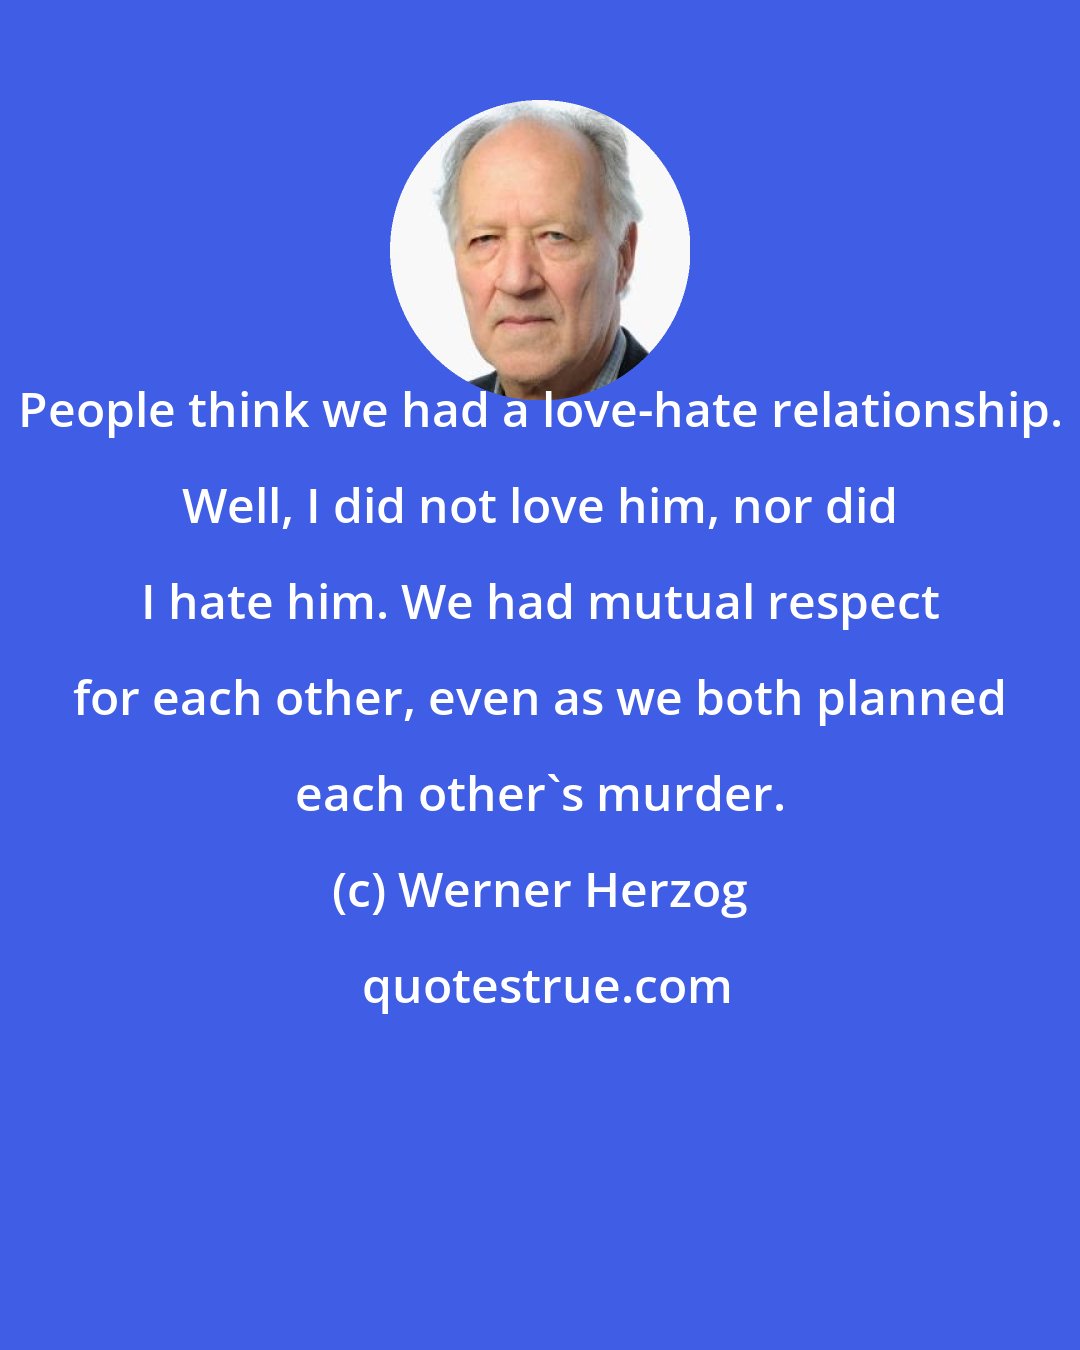 Werner Herzog: People think we had a love-hate relationship. Well, I did not love him, nor did I hate him. We had mutual respect for each other, even as we both planned each other's murder.